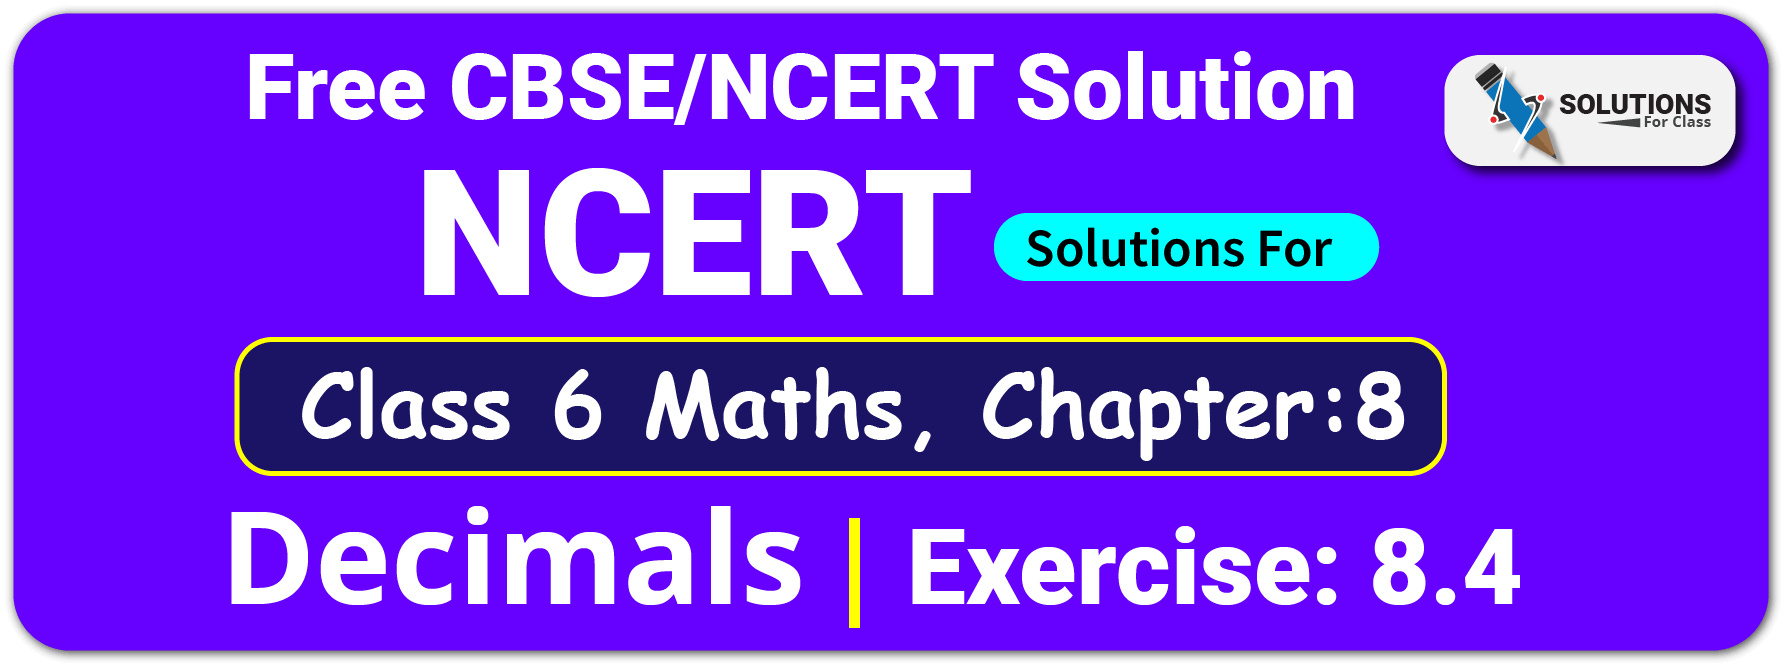 NCERT Solutions For Class 6 Maths Chapter 8 Decimals Exercise 8.4